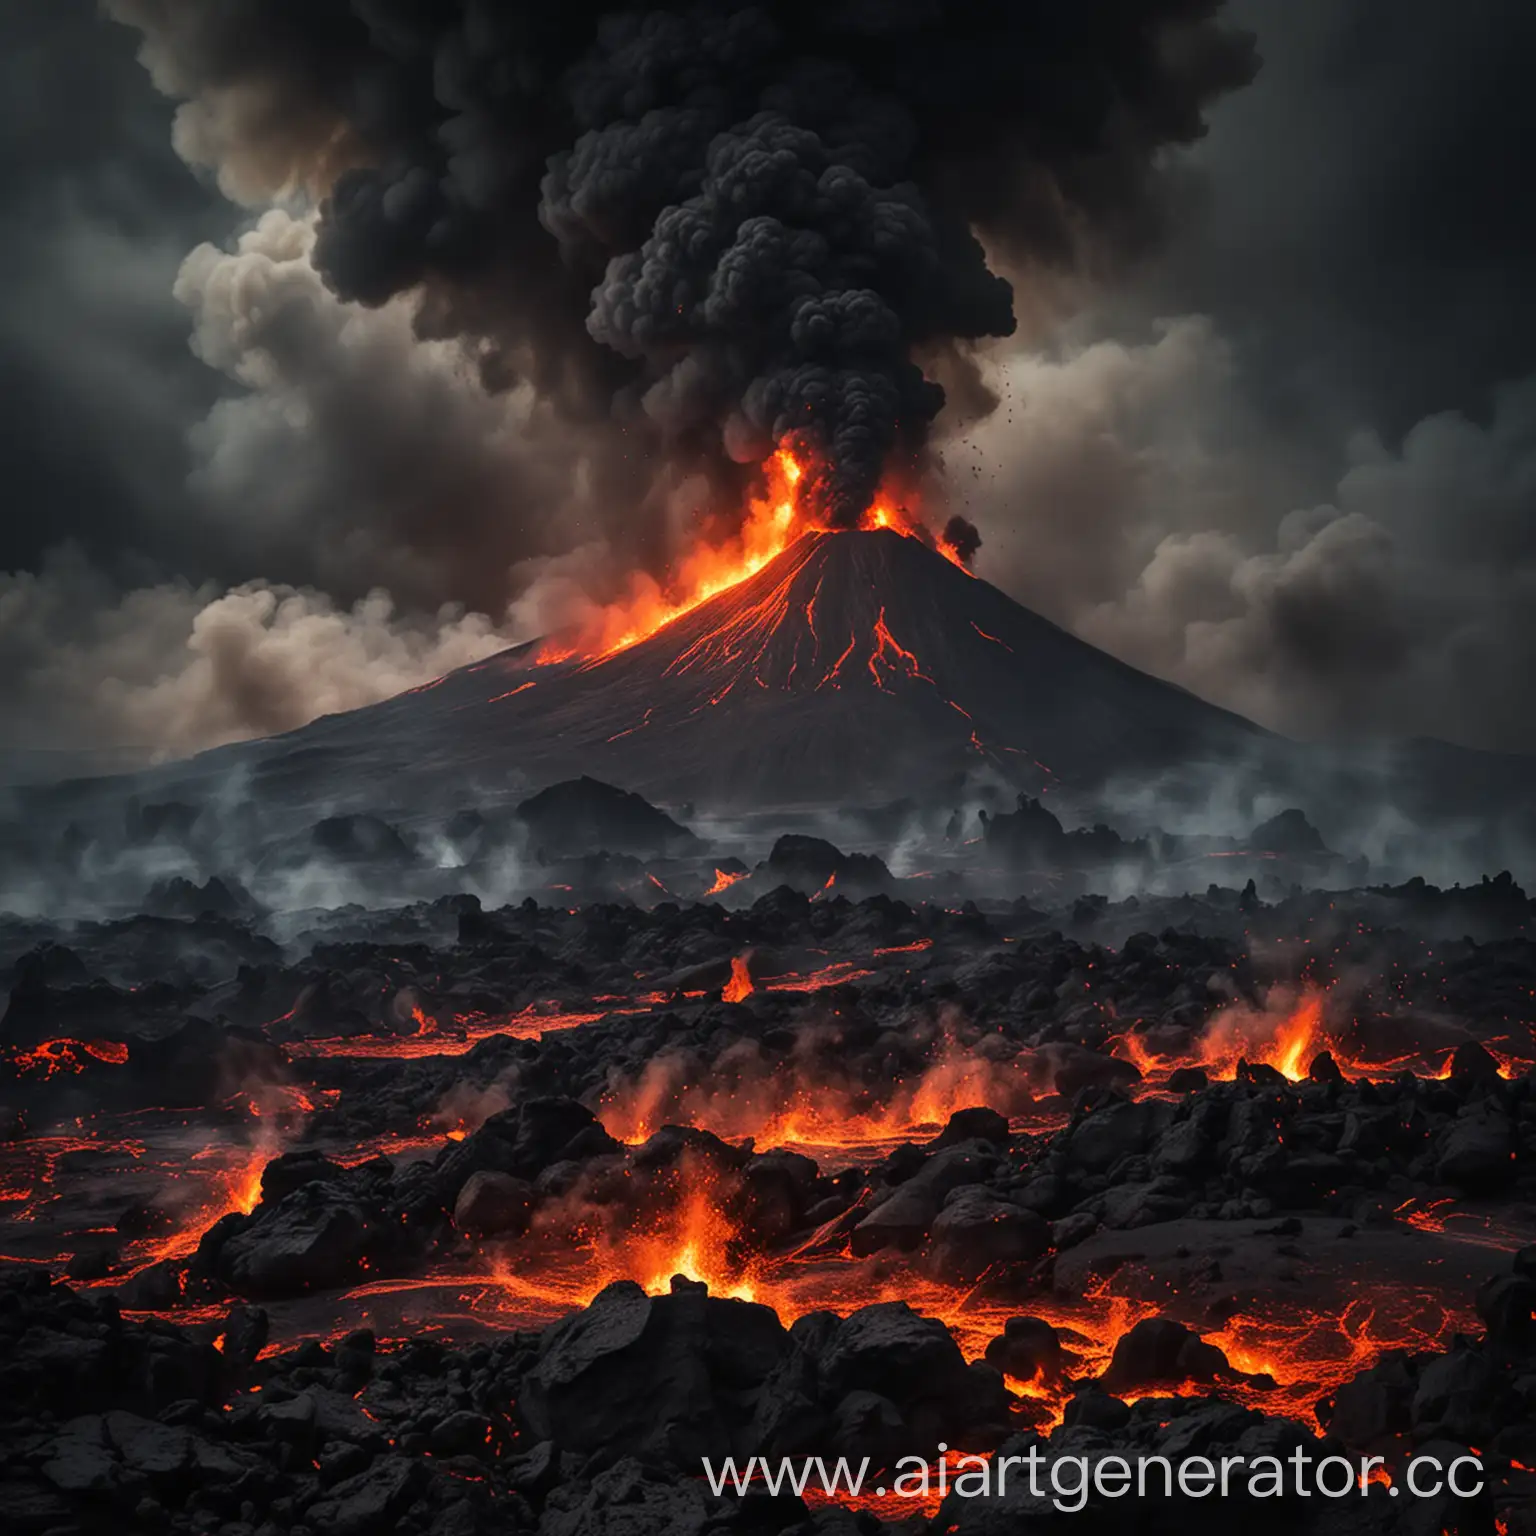 Erupting-Volcanoes-in-Fiery-Landscape-Dramatic-Scene-with-Smoke-and-Lava